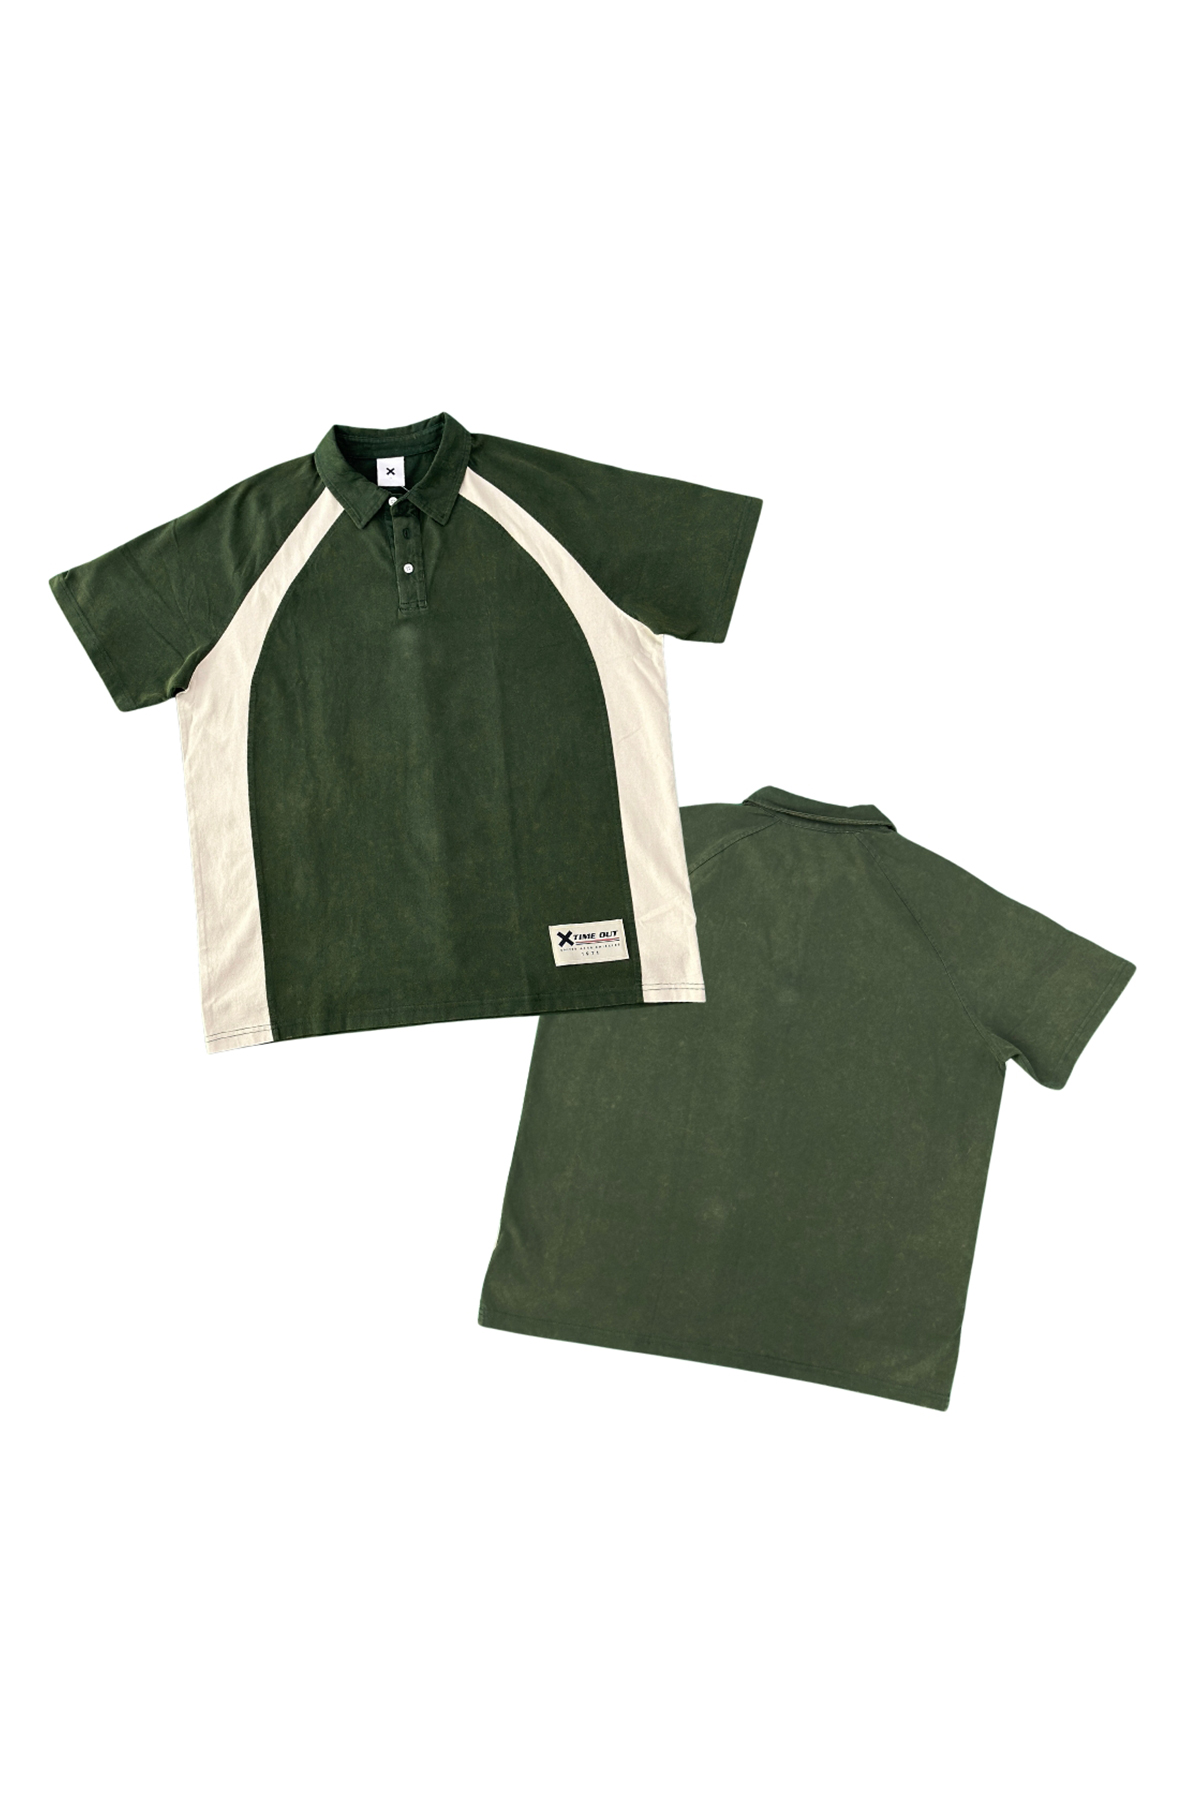 Time-Out-X-Unisex-Short-Sleeve-Rugby-Shirt-green-front-back